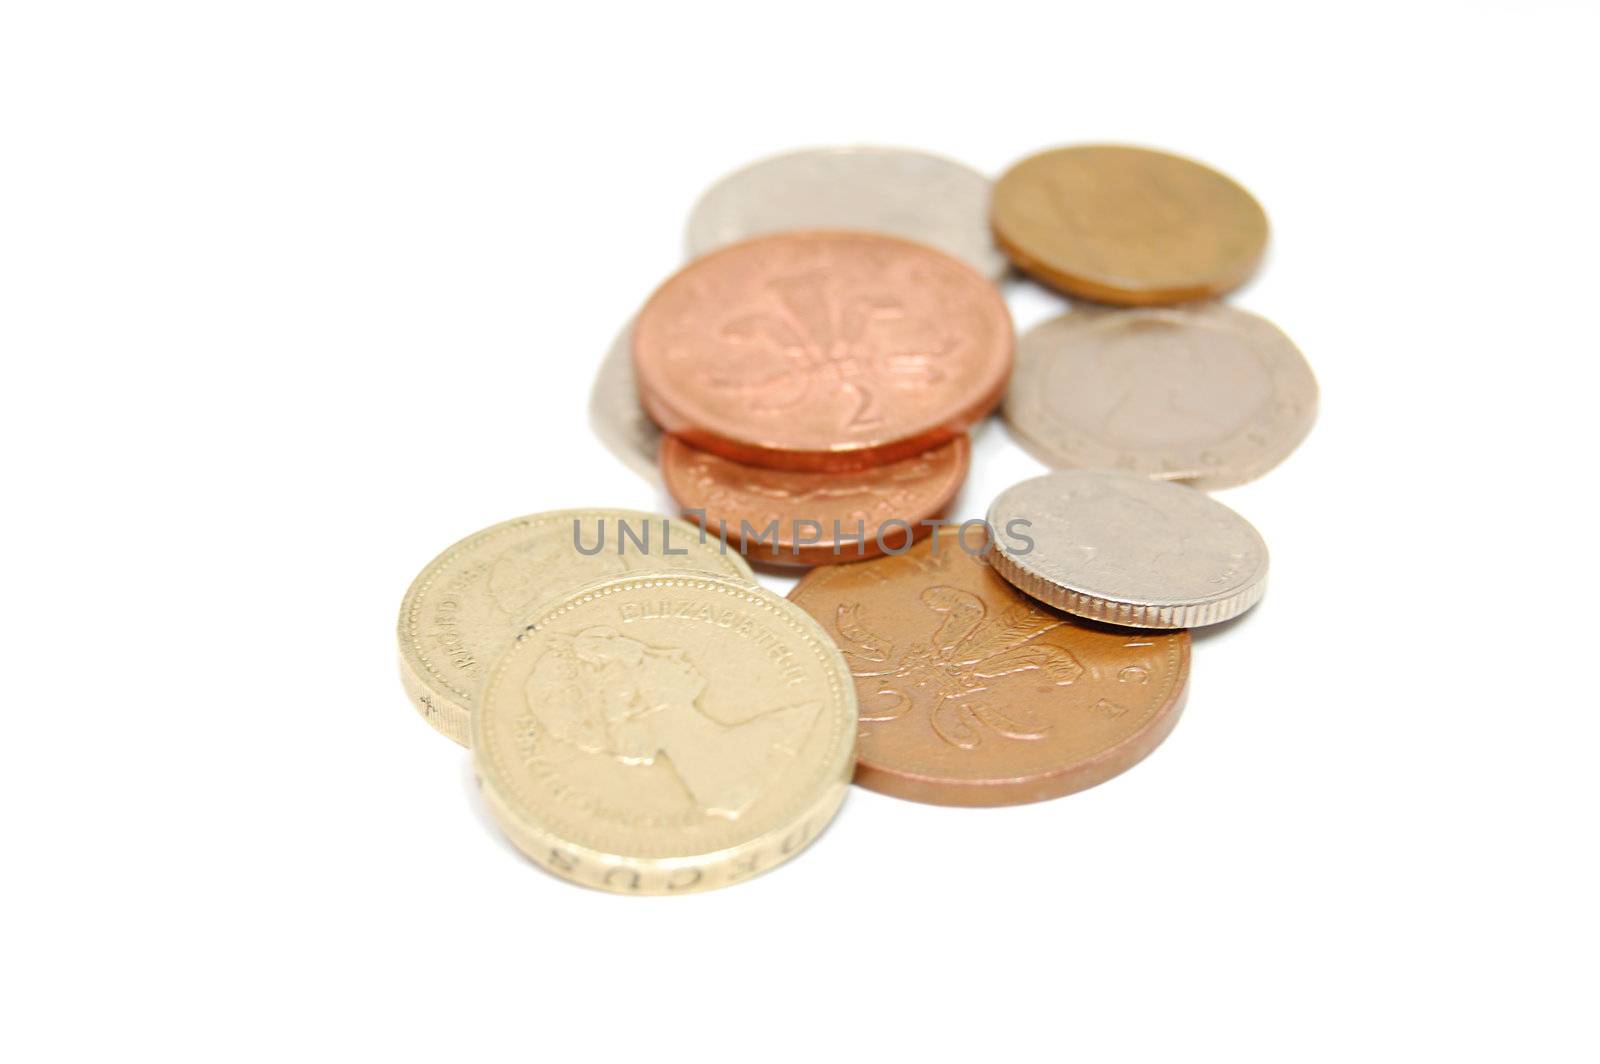 Some coins isolated on white